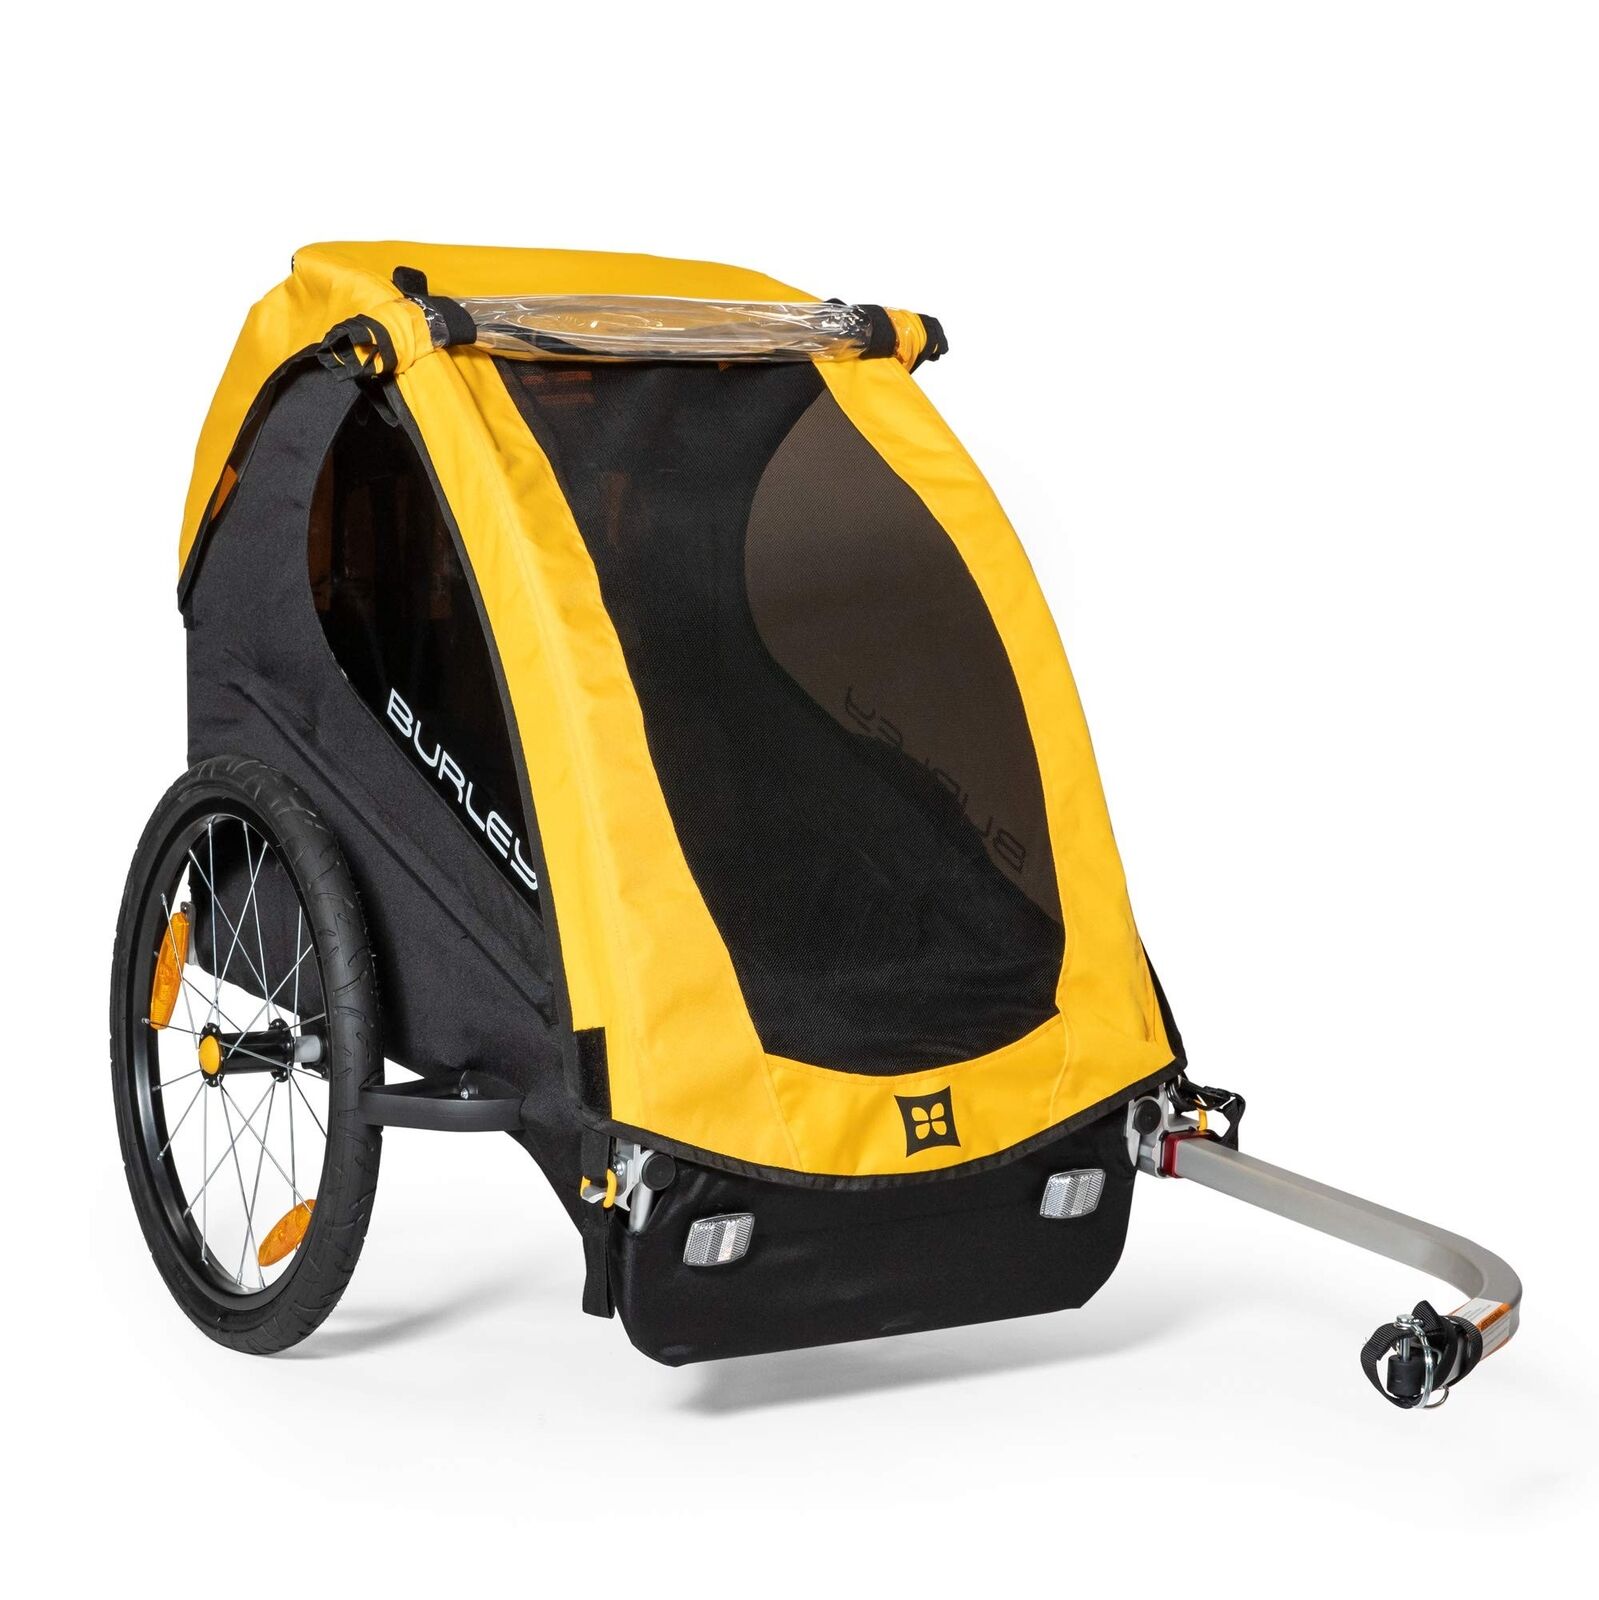 Burley Bee, 1 and 2 Seat, Lightweight, Kids Bike-Only Trailer 2022 1 Seat